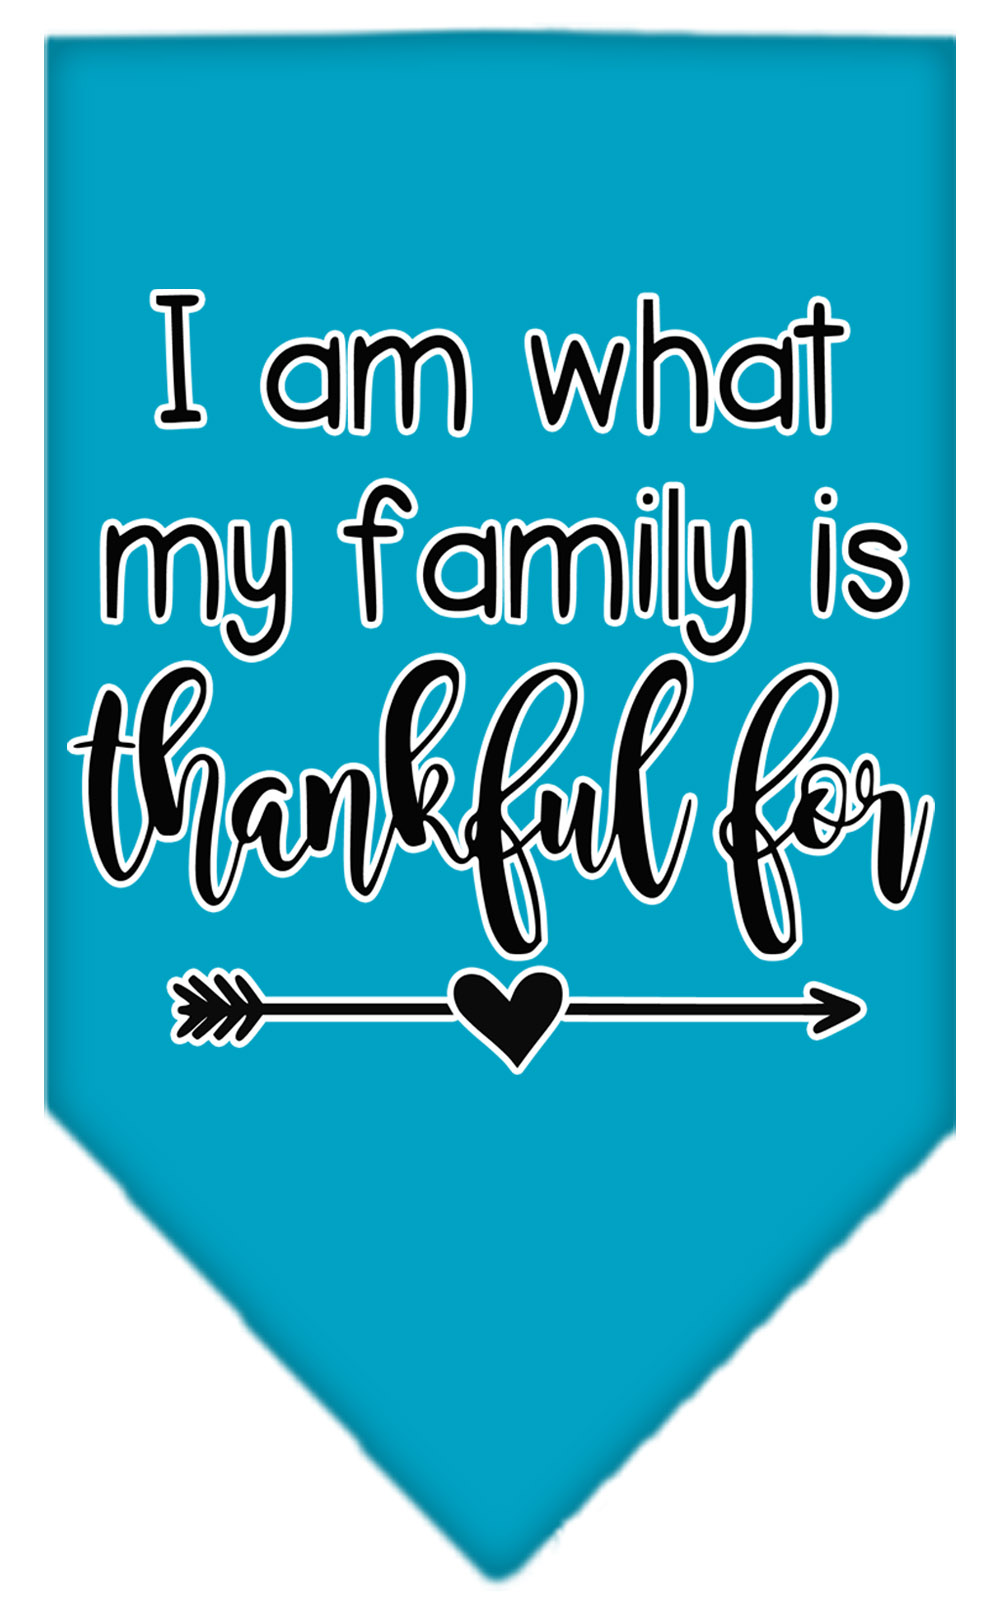 I Am What My Family is Thankful For Screen Print Bandana Turquoise Small